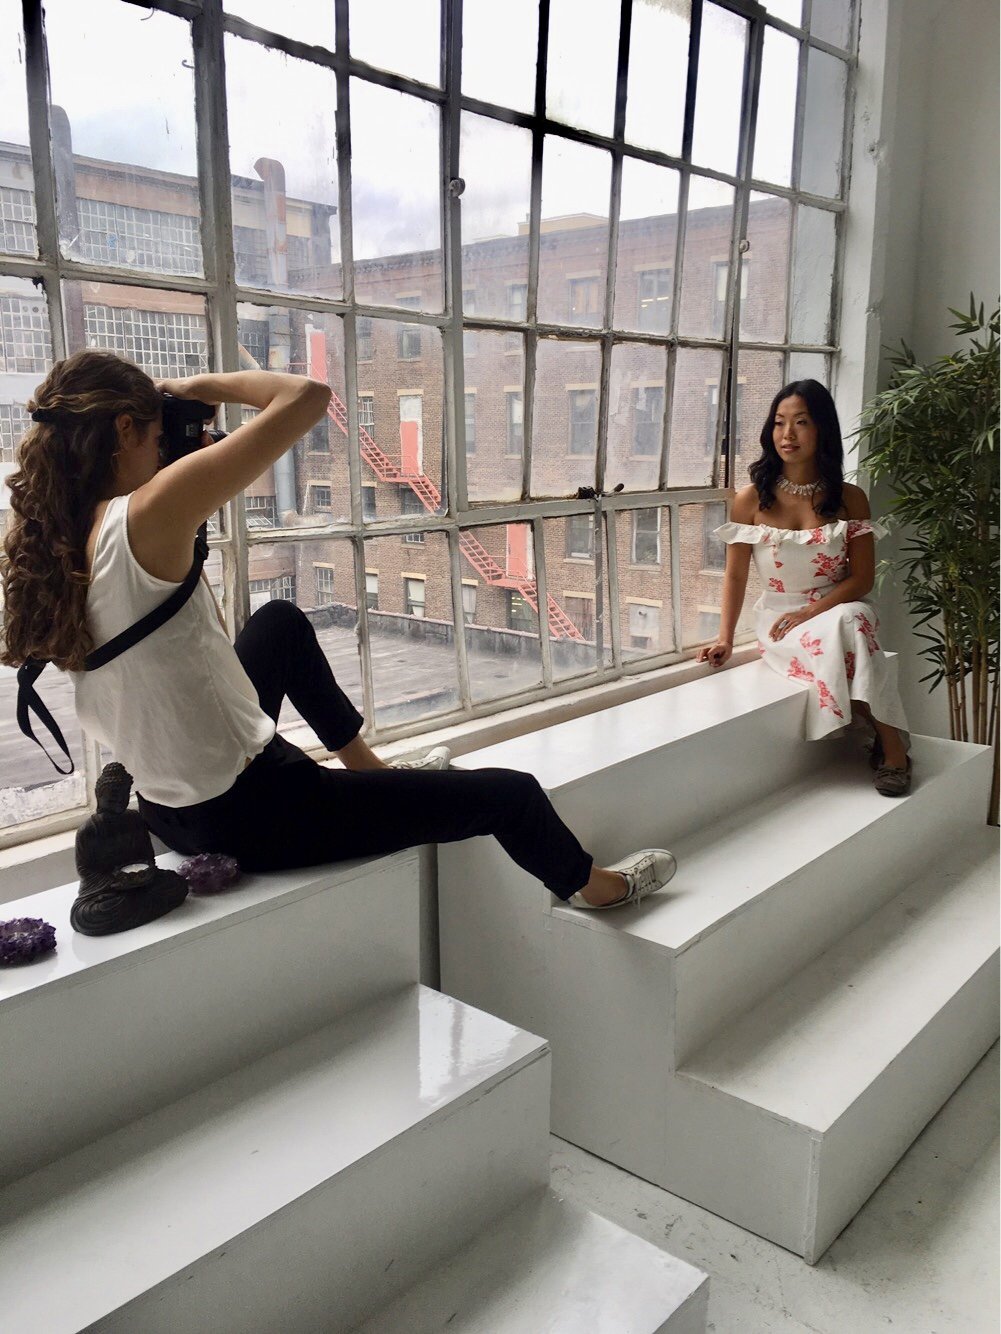 Laura Volpacchio photographs holistic wellness entrepreneur as she poses by a large industrial window  during a branding photography session in LIC, Queens